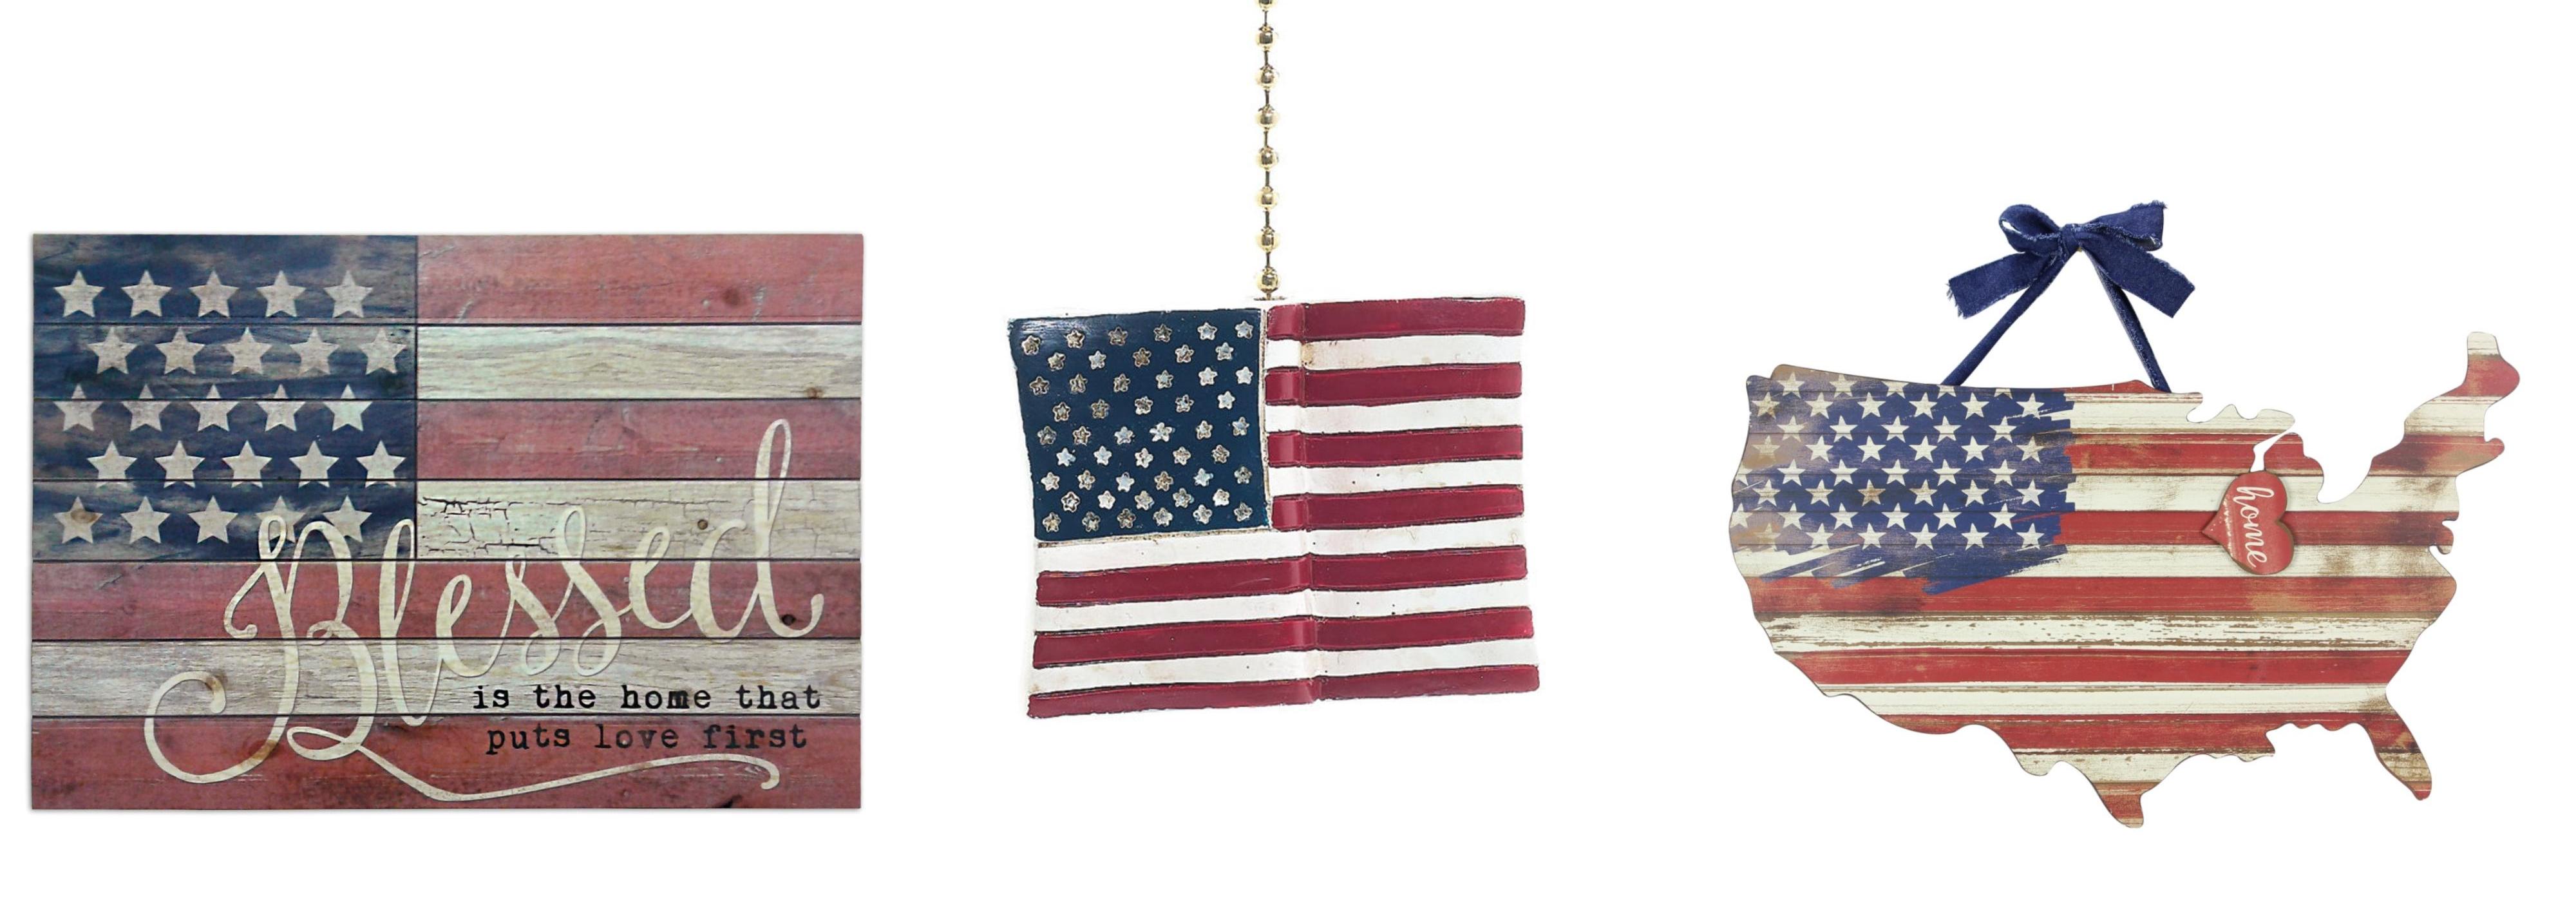 How to Decorate for the 4th of July